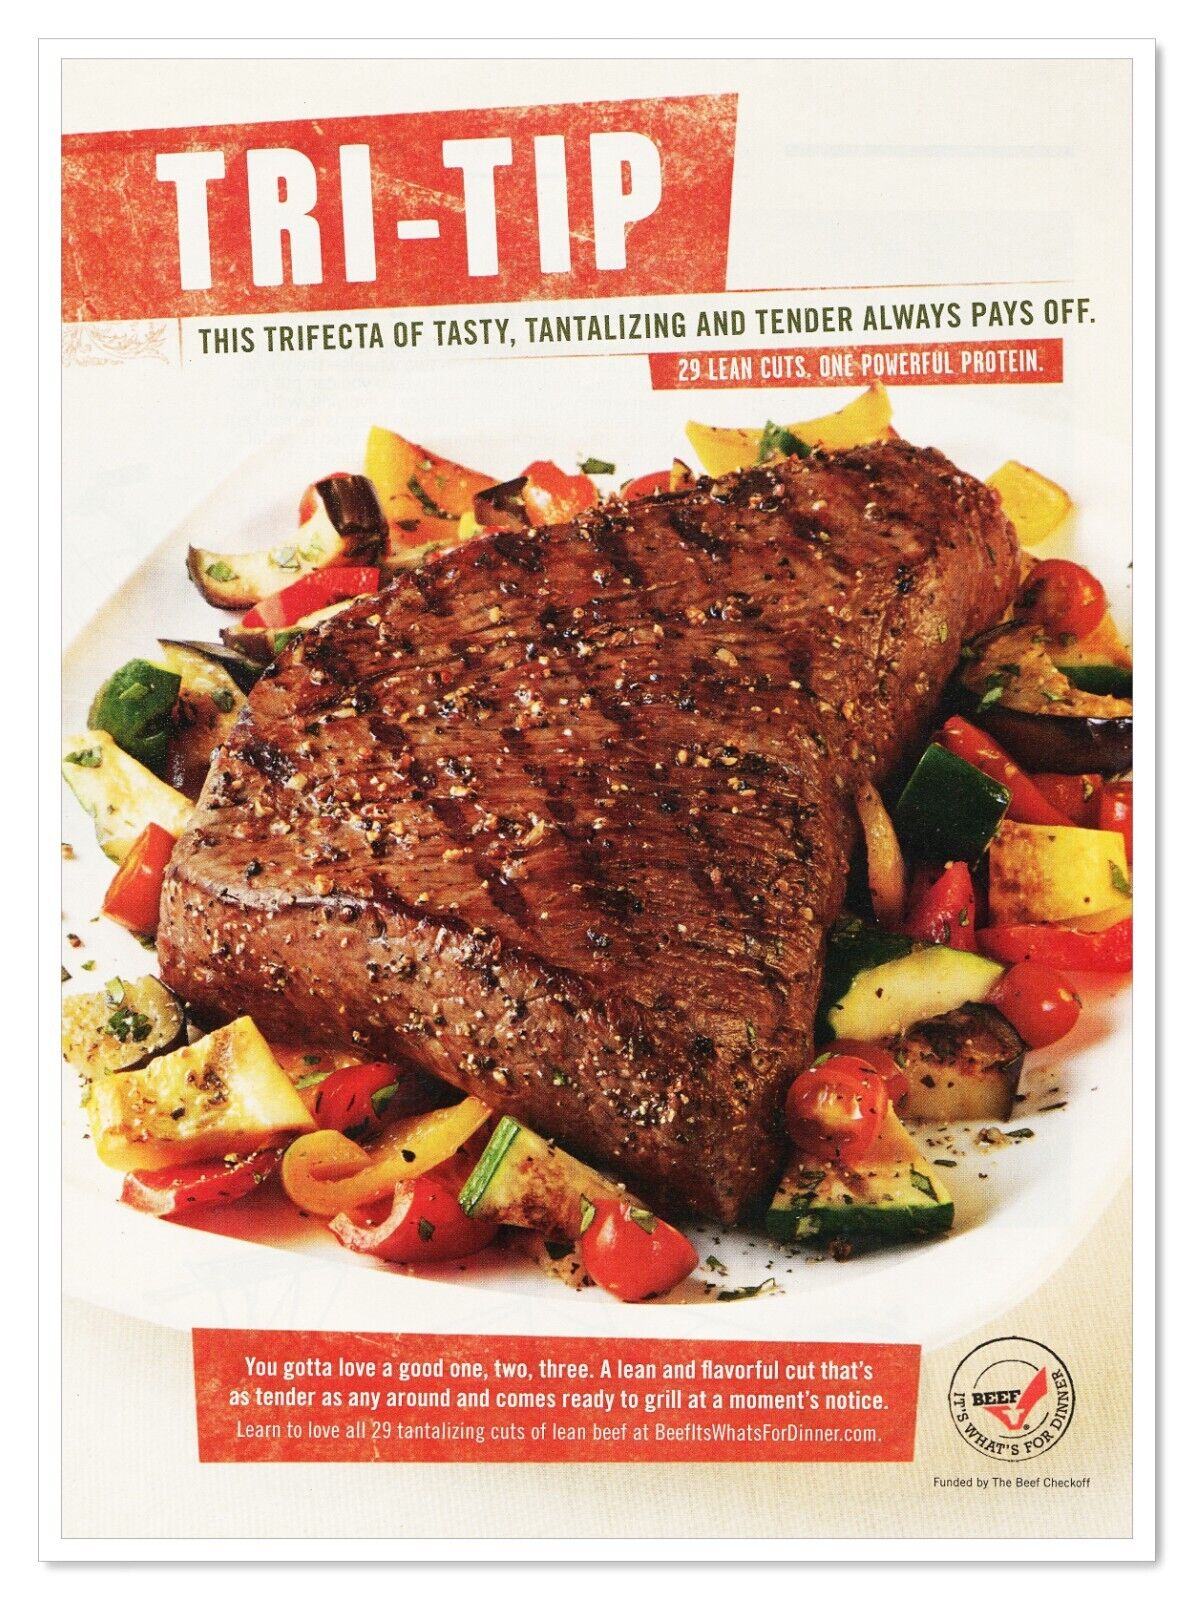 Beef It's What's For Dinner Tri-Tip Steak 2011 Full-Page Print Magazine Ad